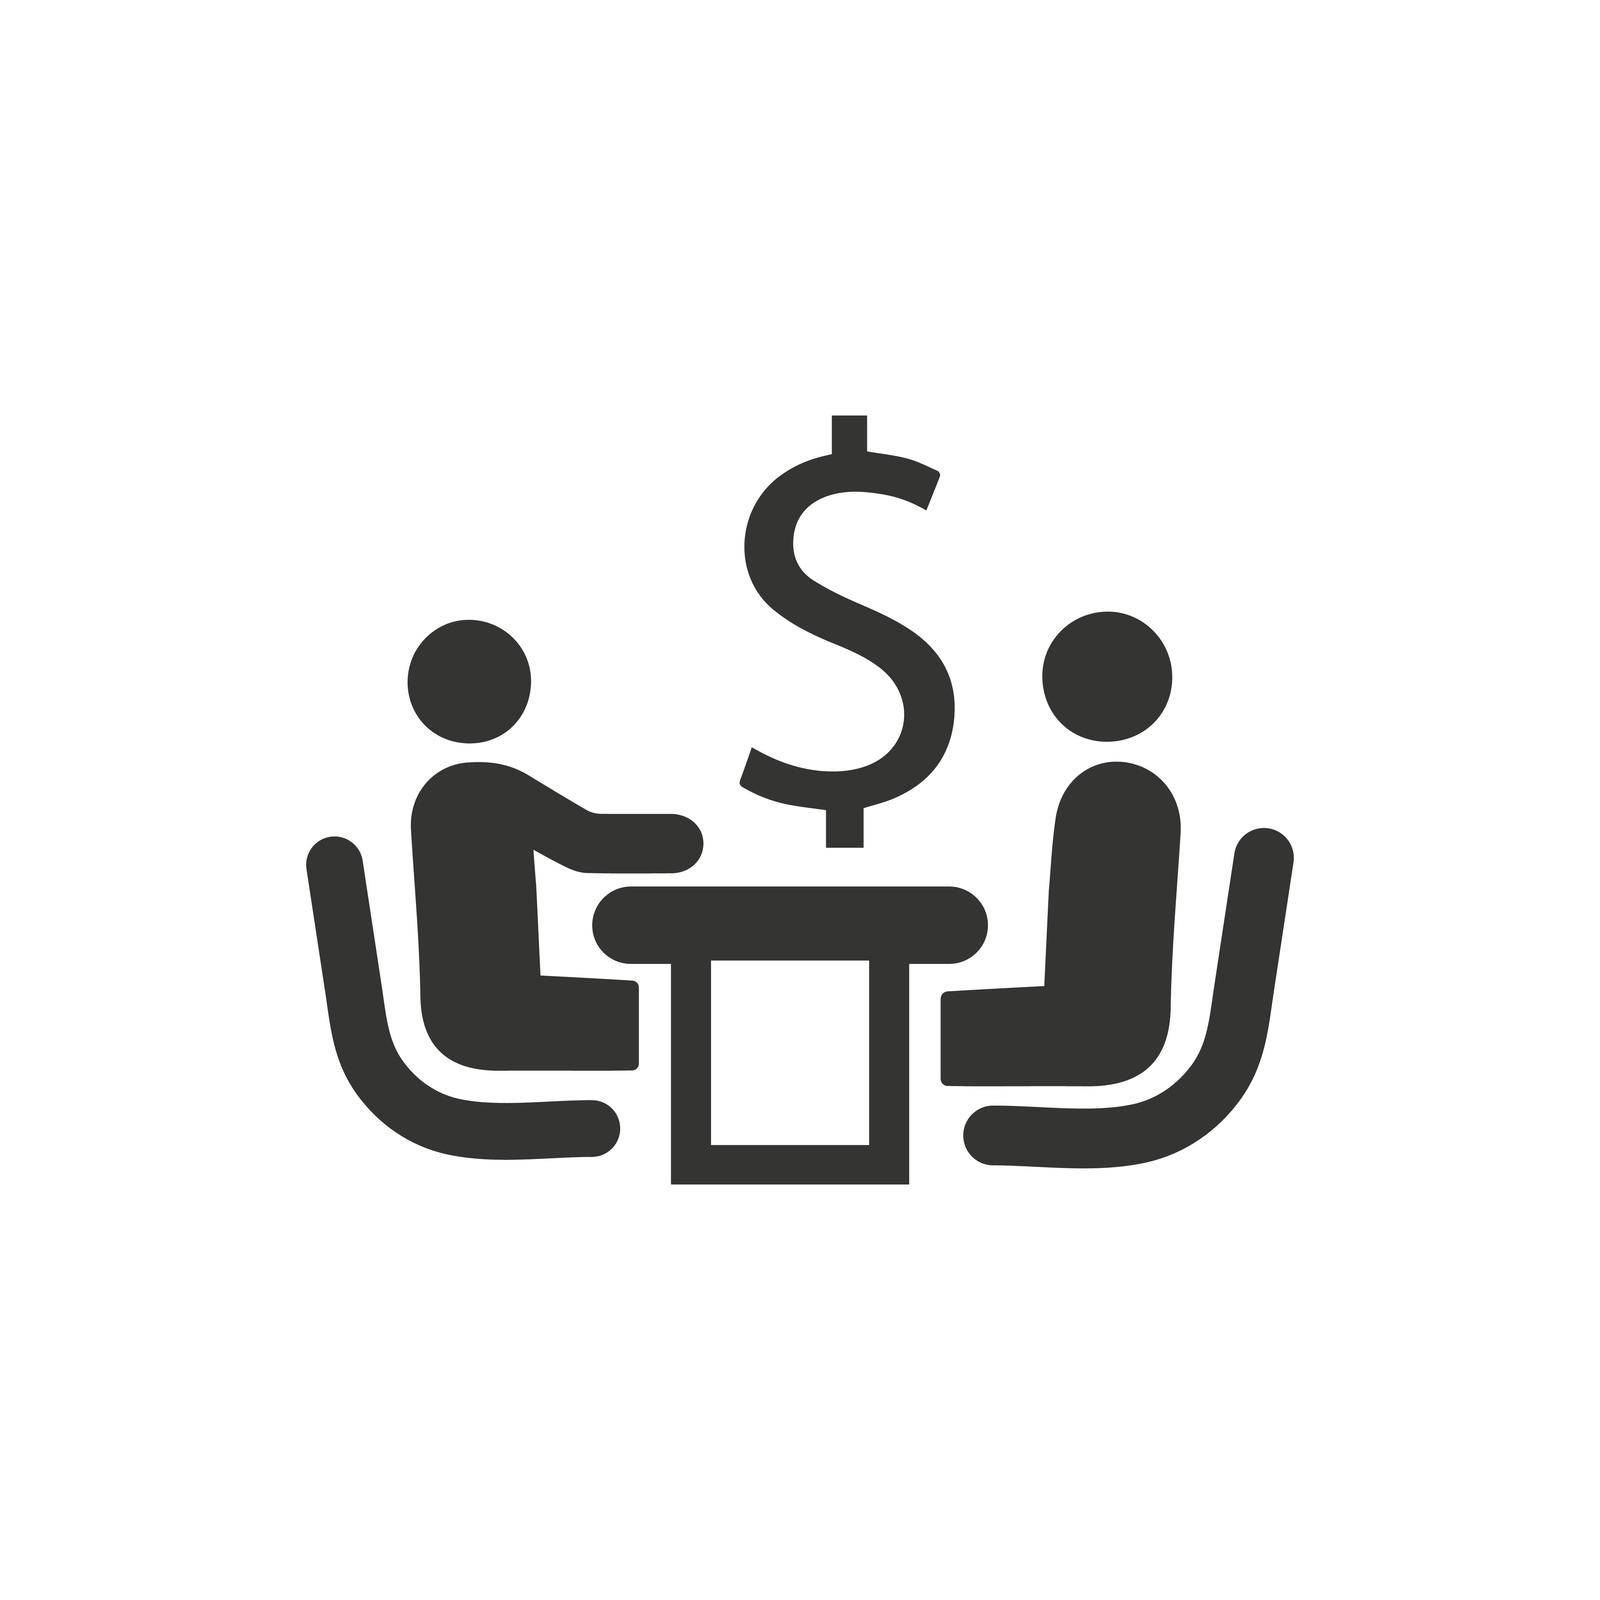 Financial Discussion icon. Vector EPS file.